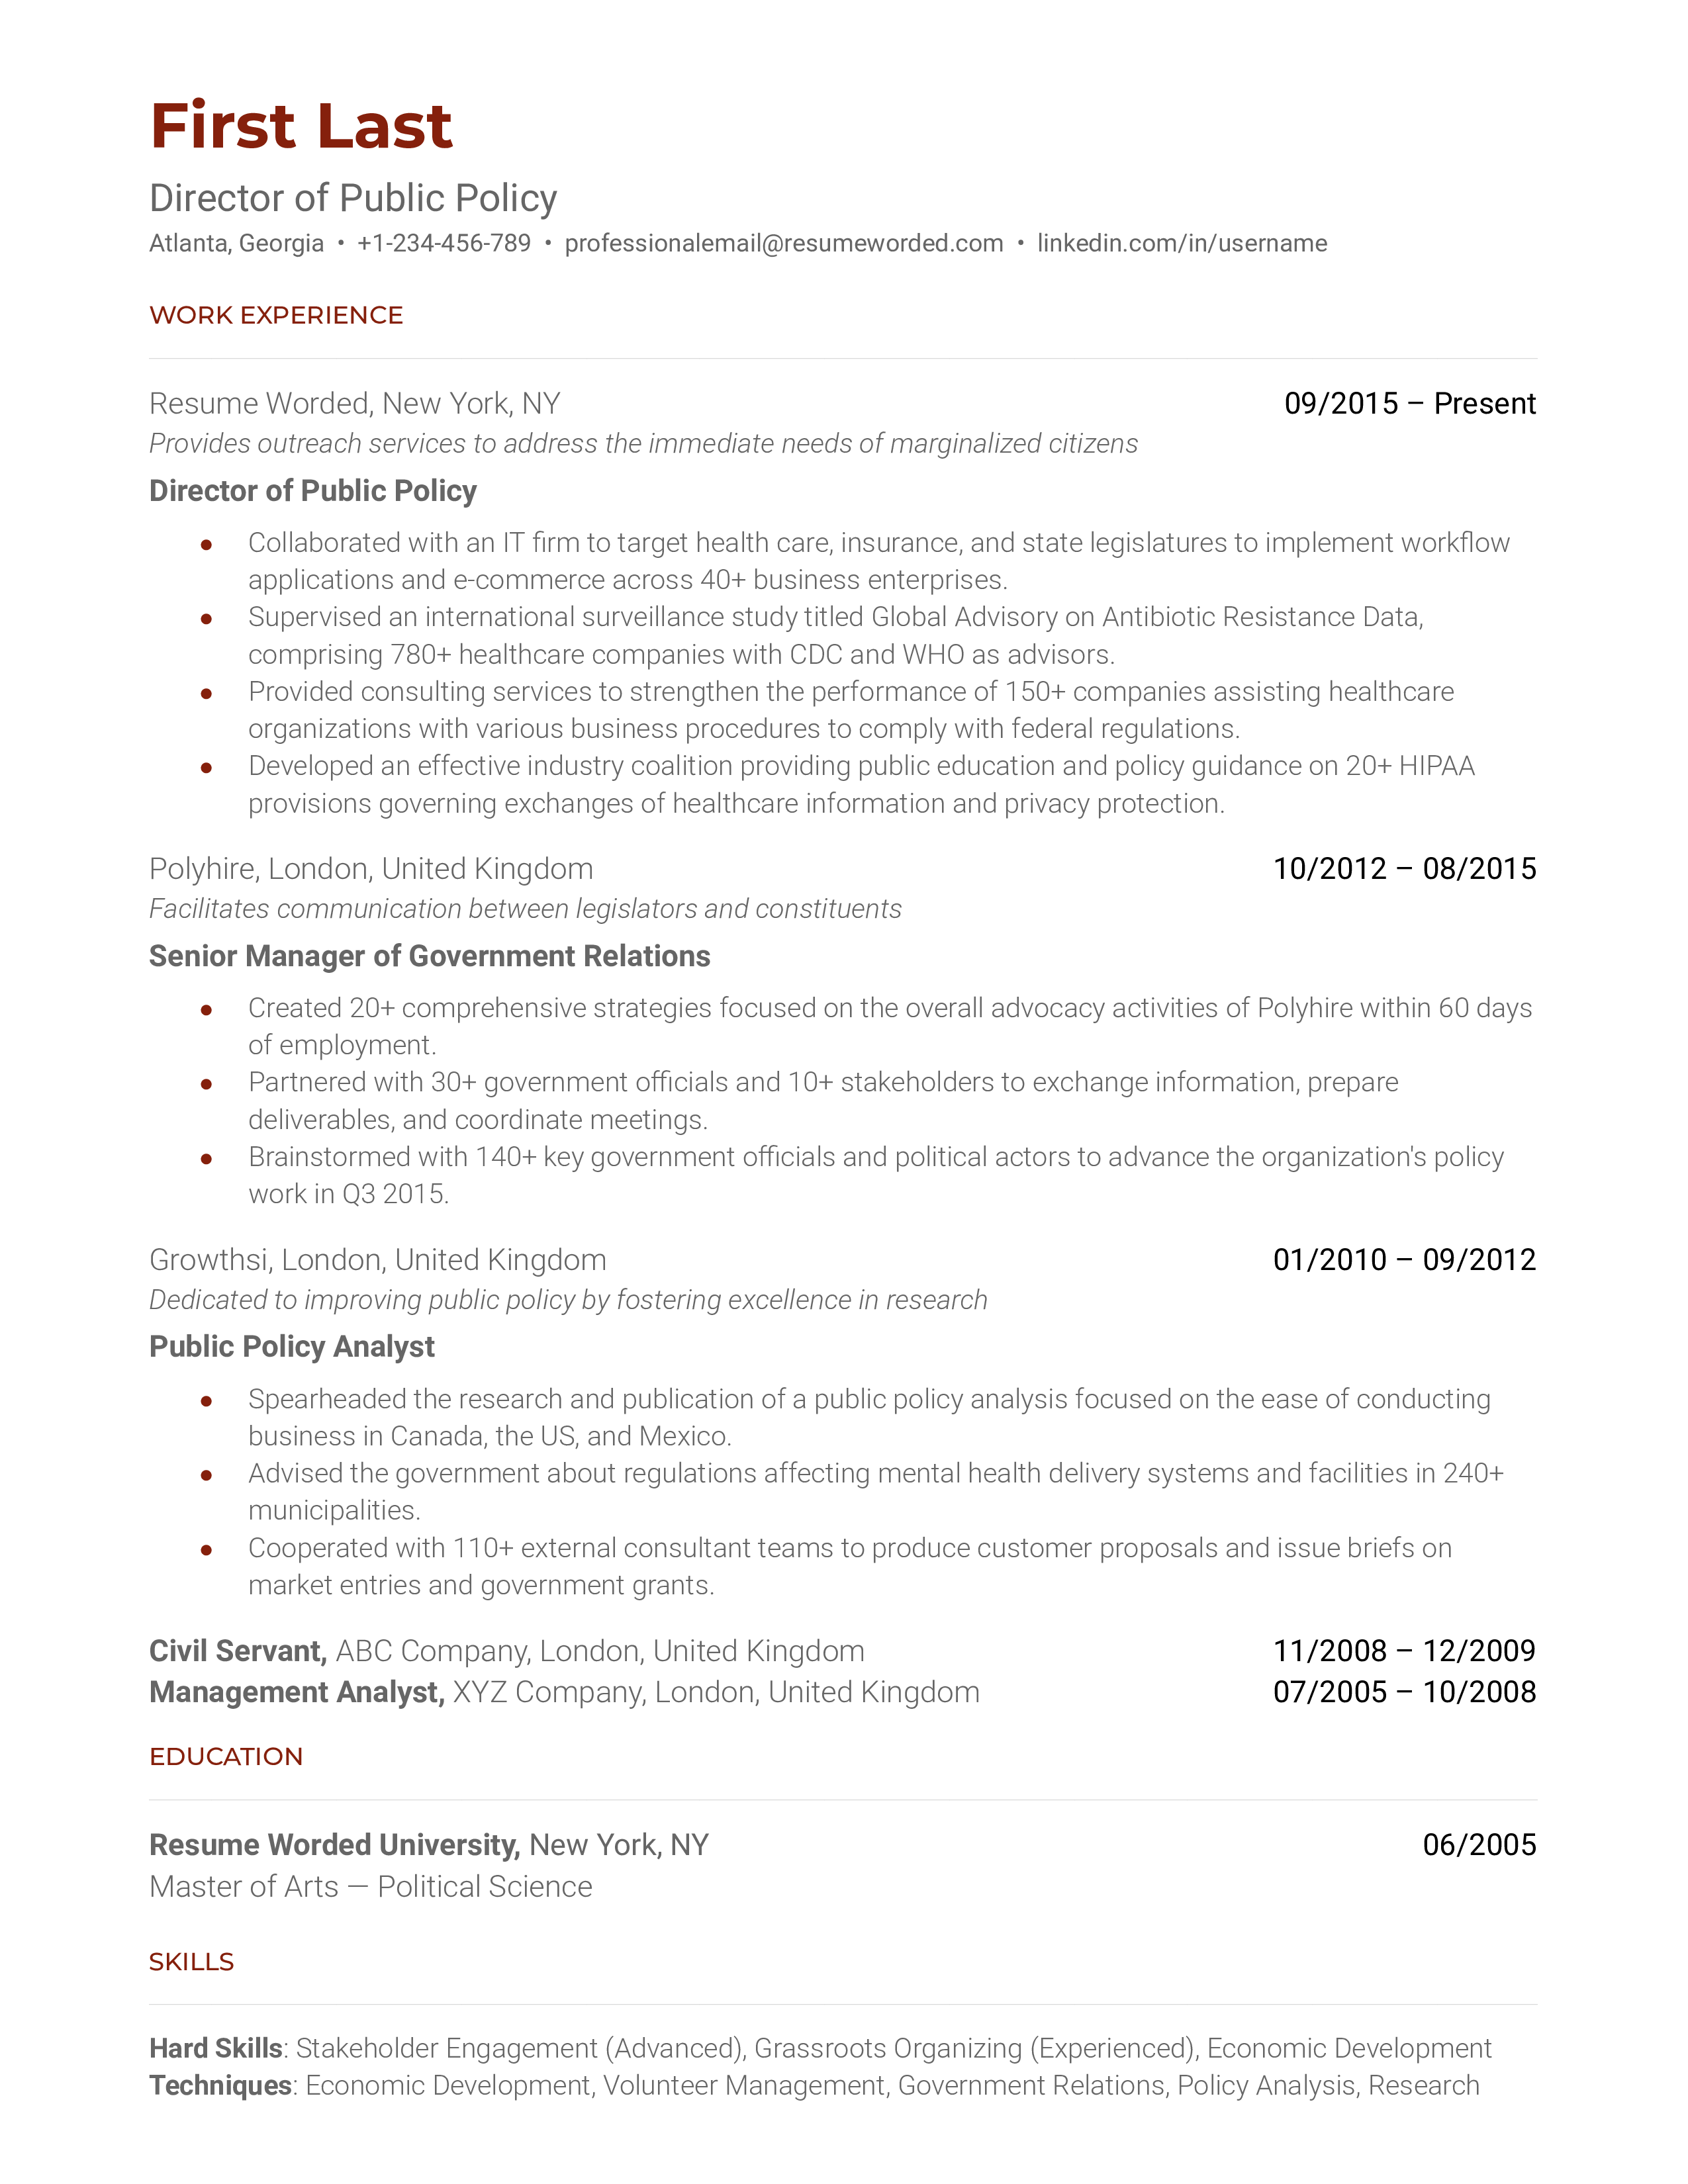 Director of Public Policy Resume Sample